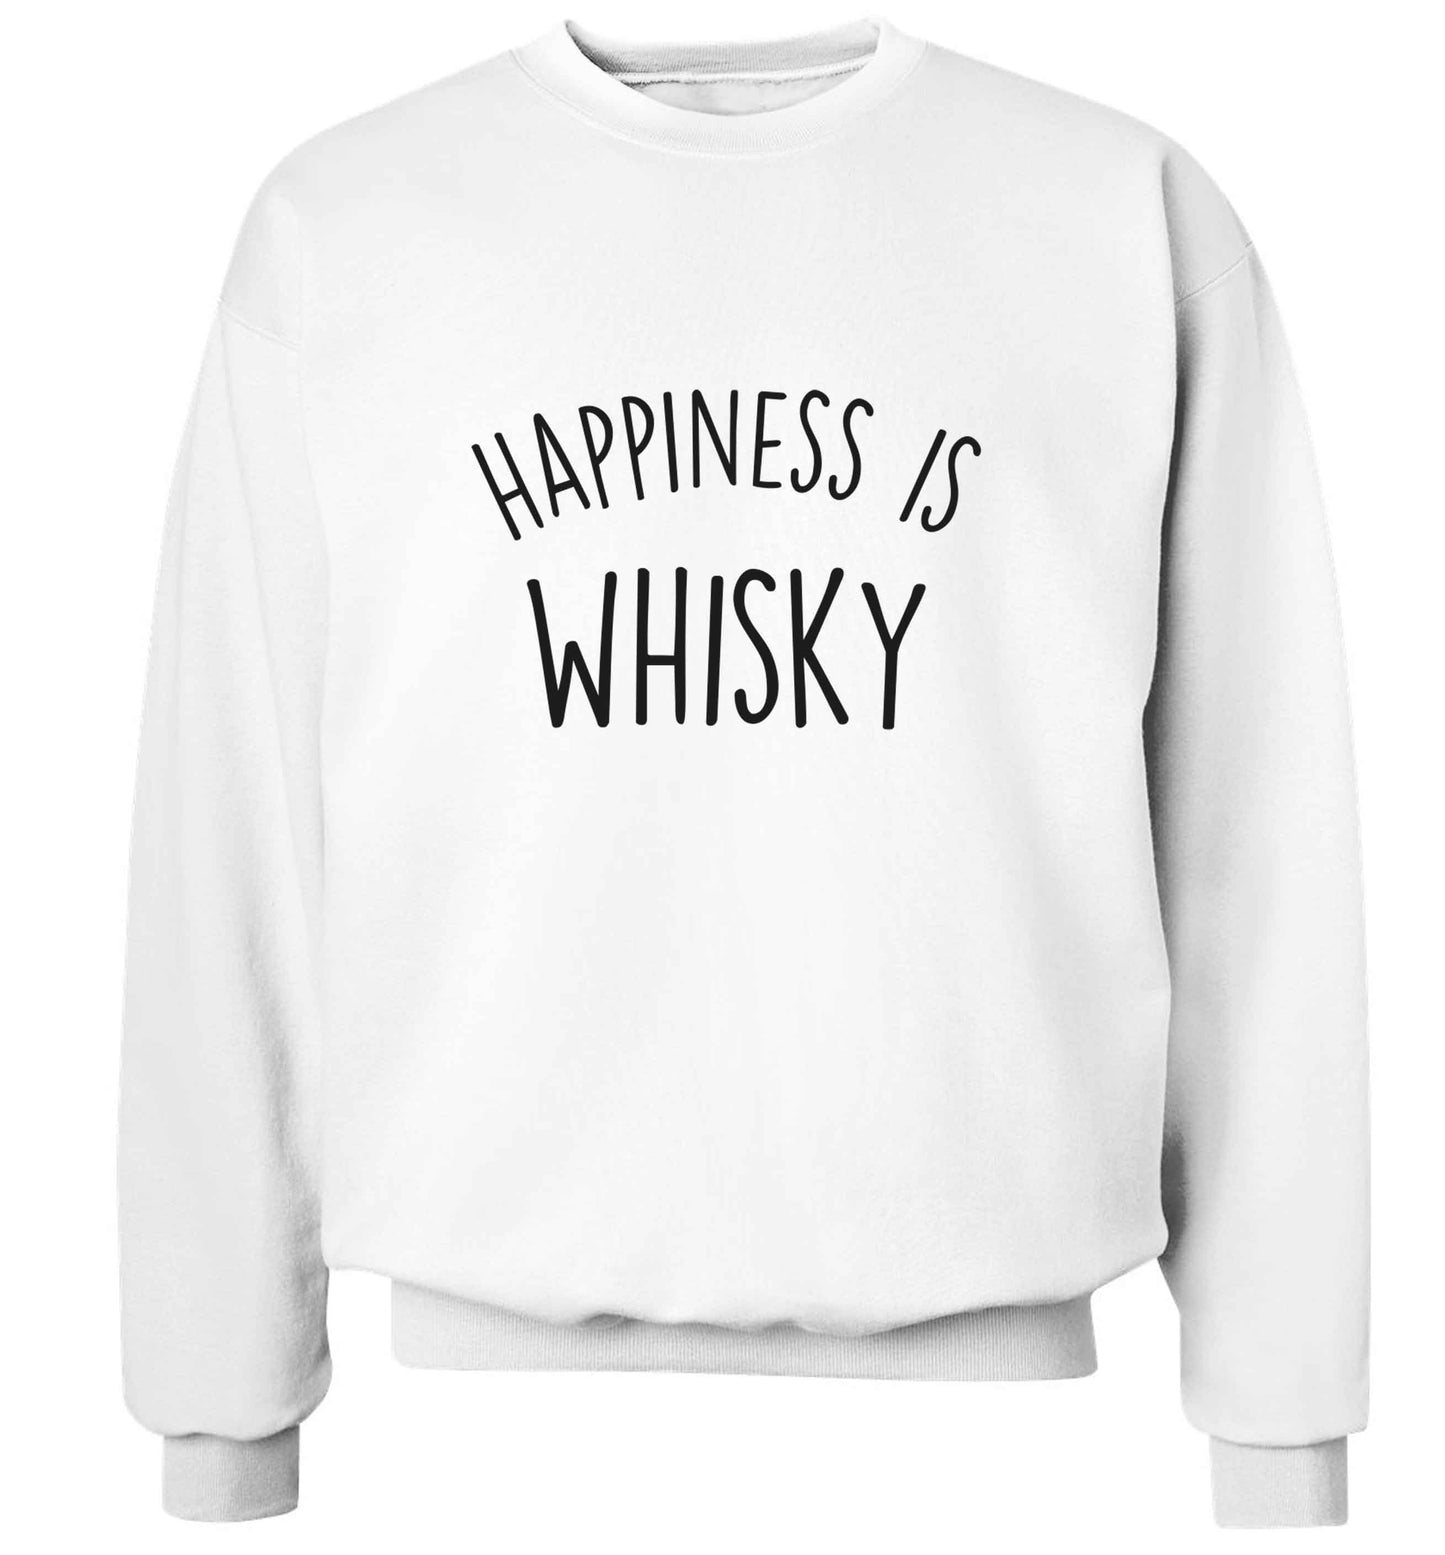 Happiness is whisky adult's unisex white sweater 2XL